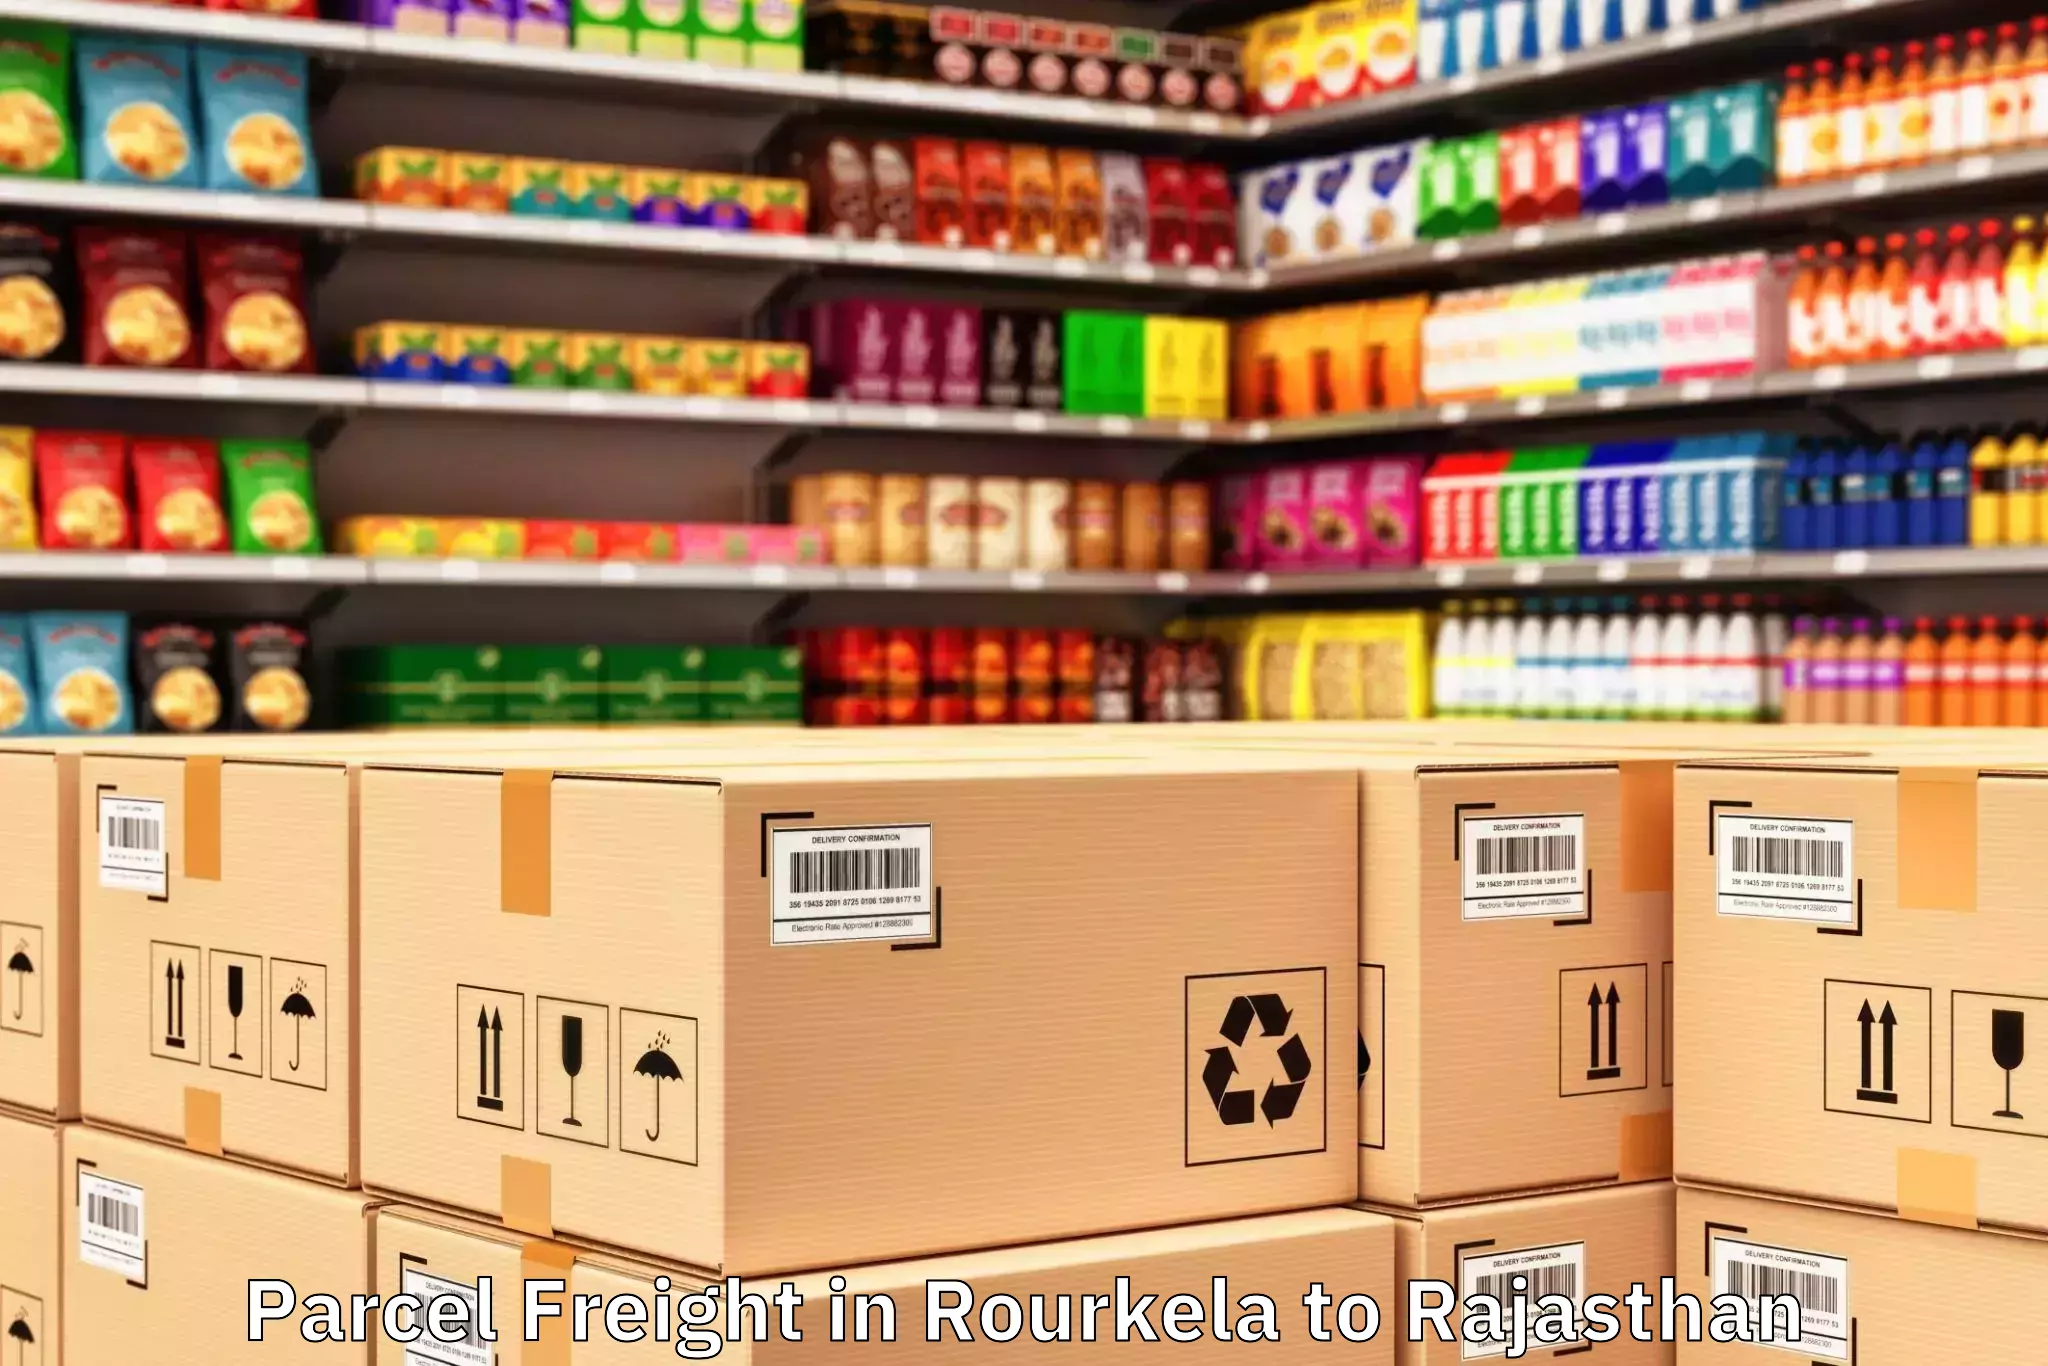 Expert Rourkela to Rajasthan Parcel Freight